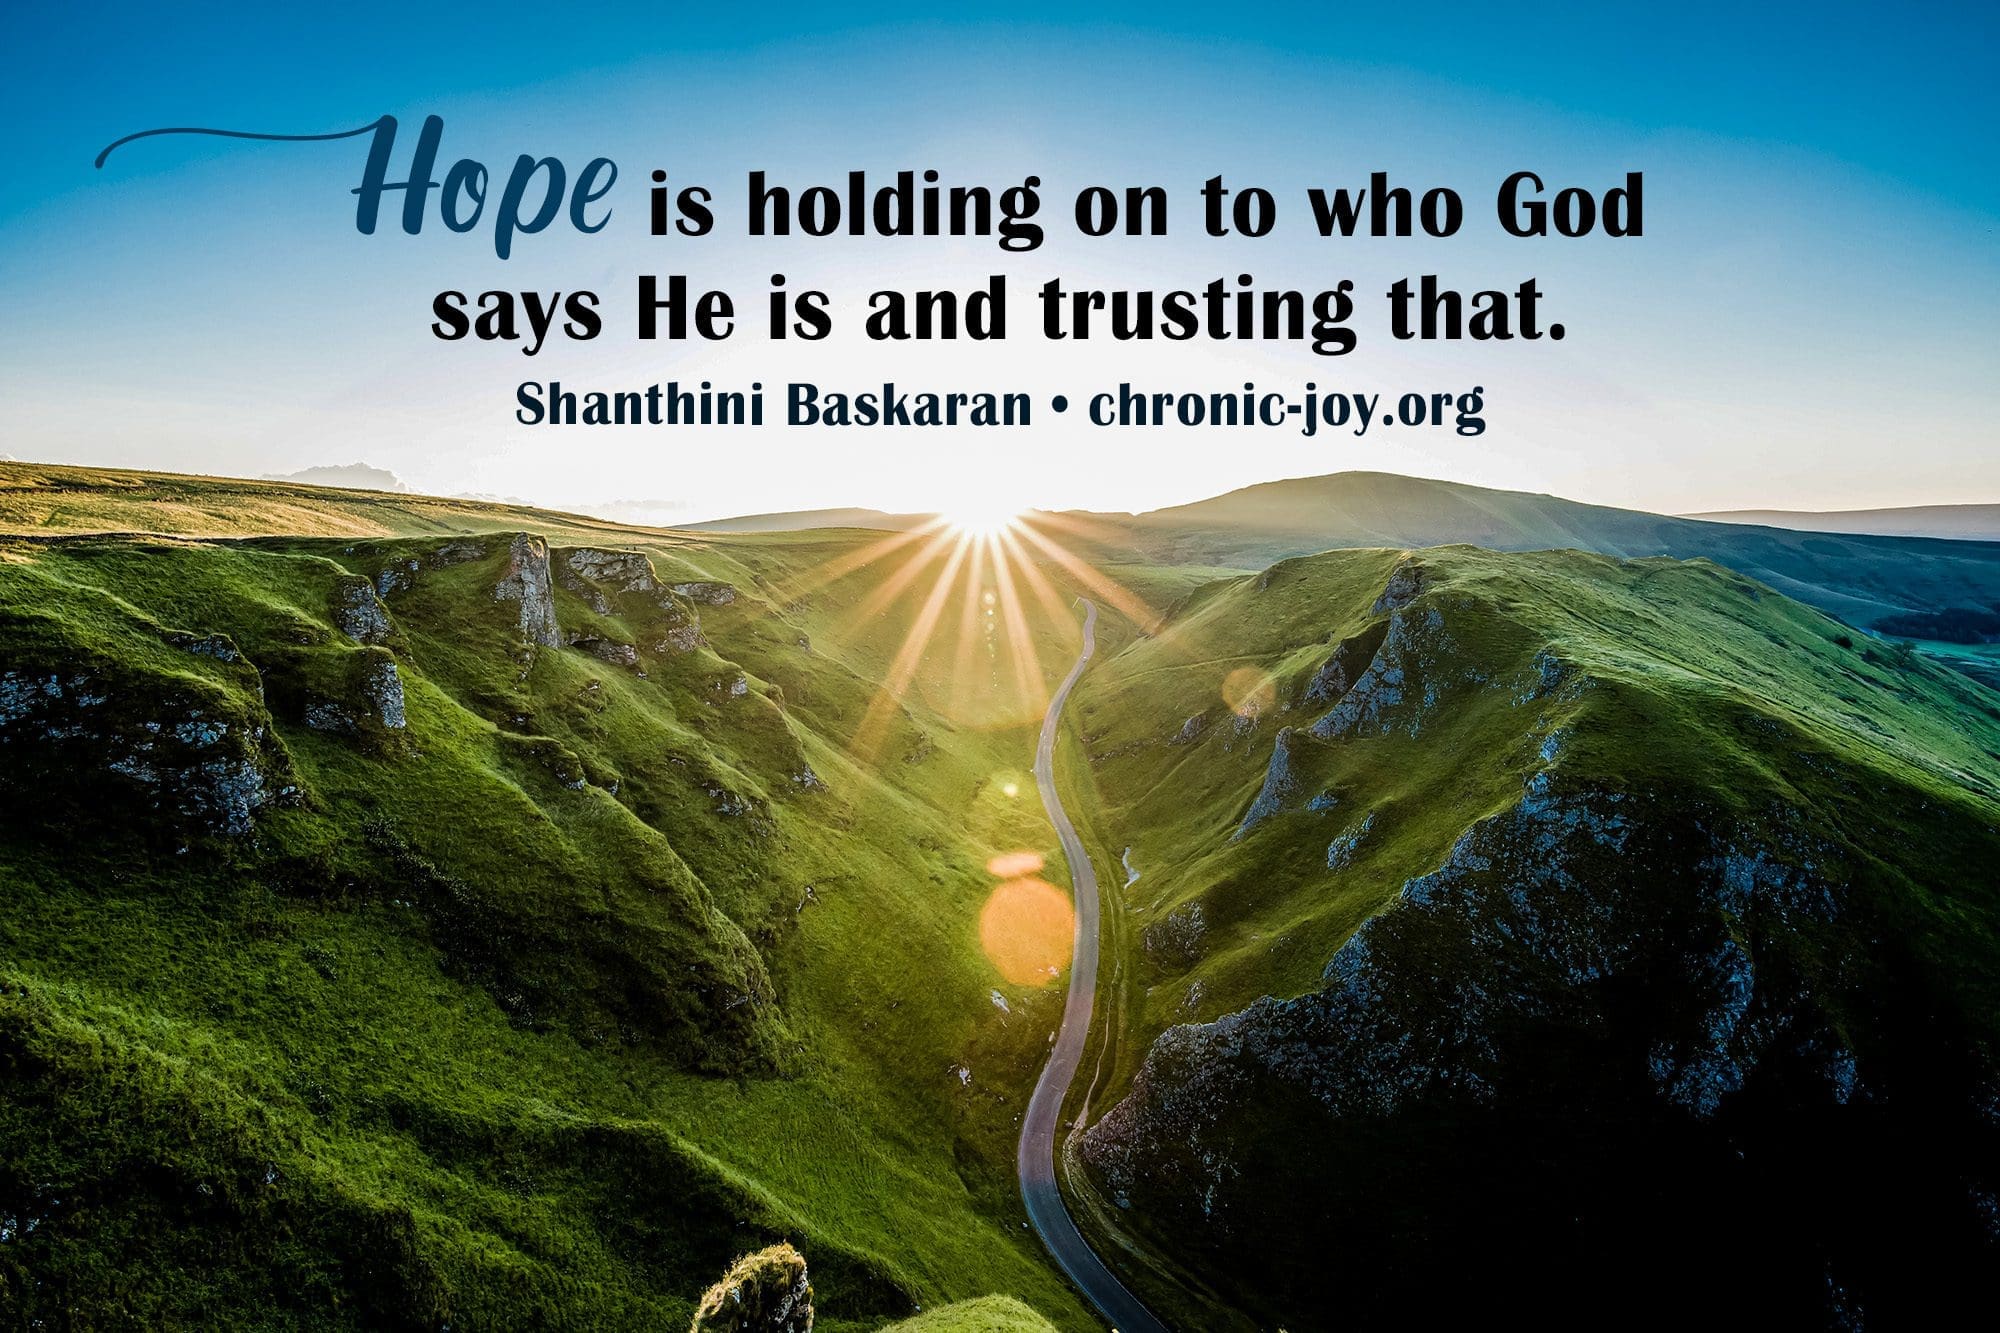 "Hope is holding on to who God says He is and trusting that." Shanthini Baskaran